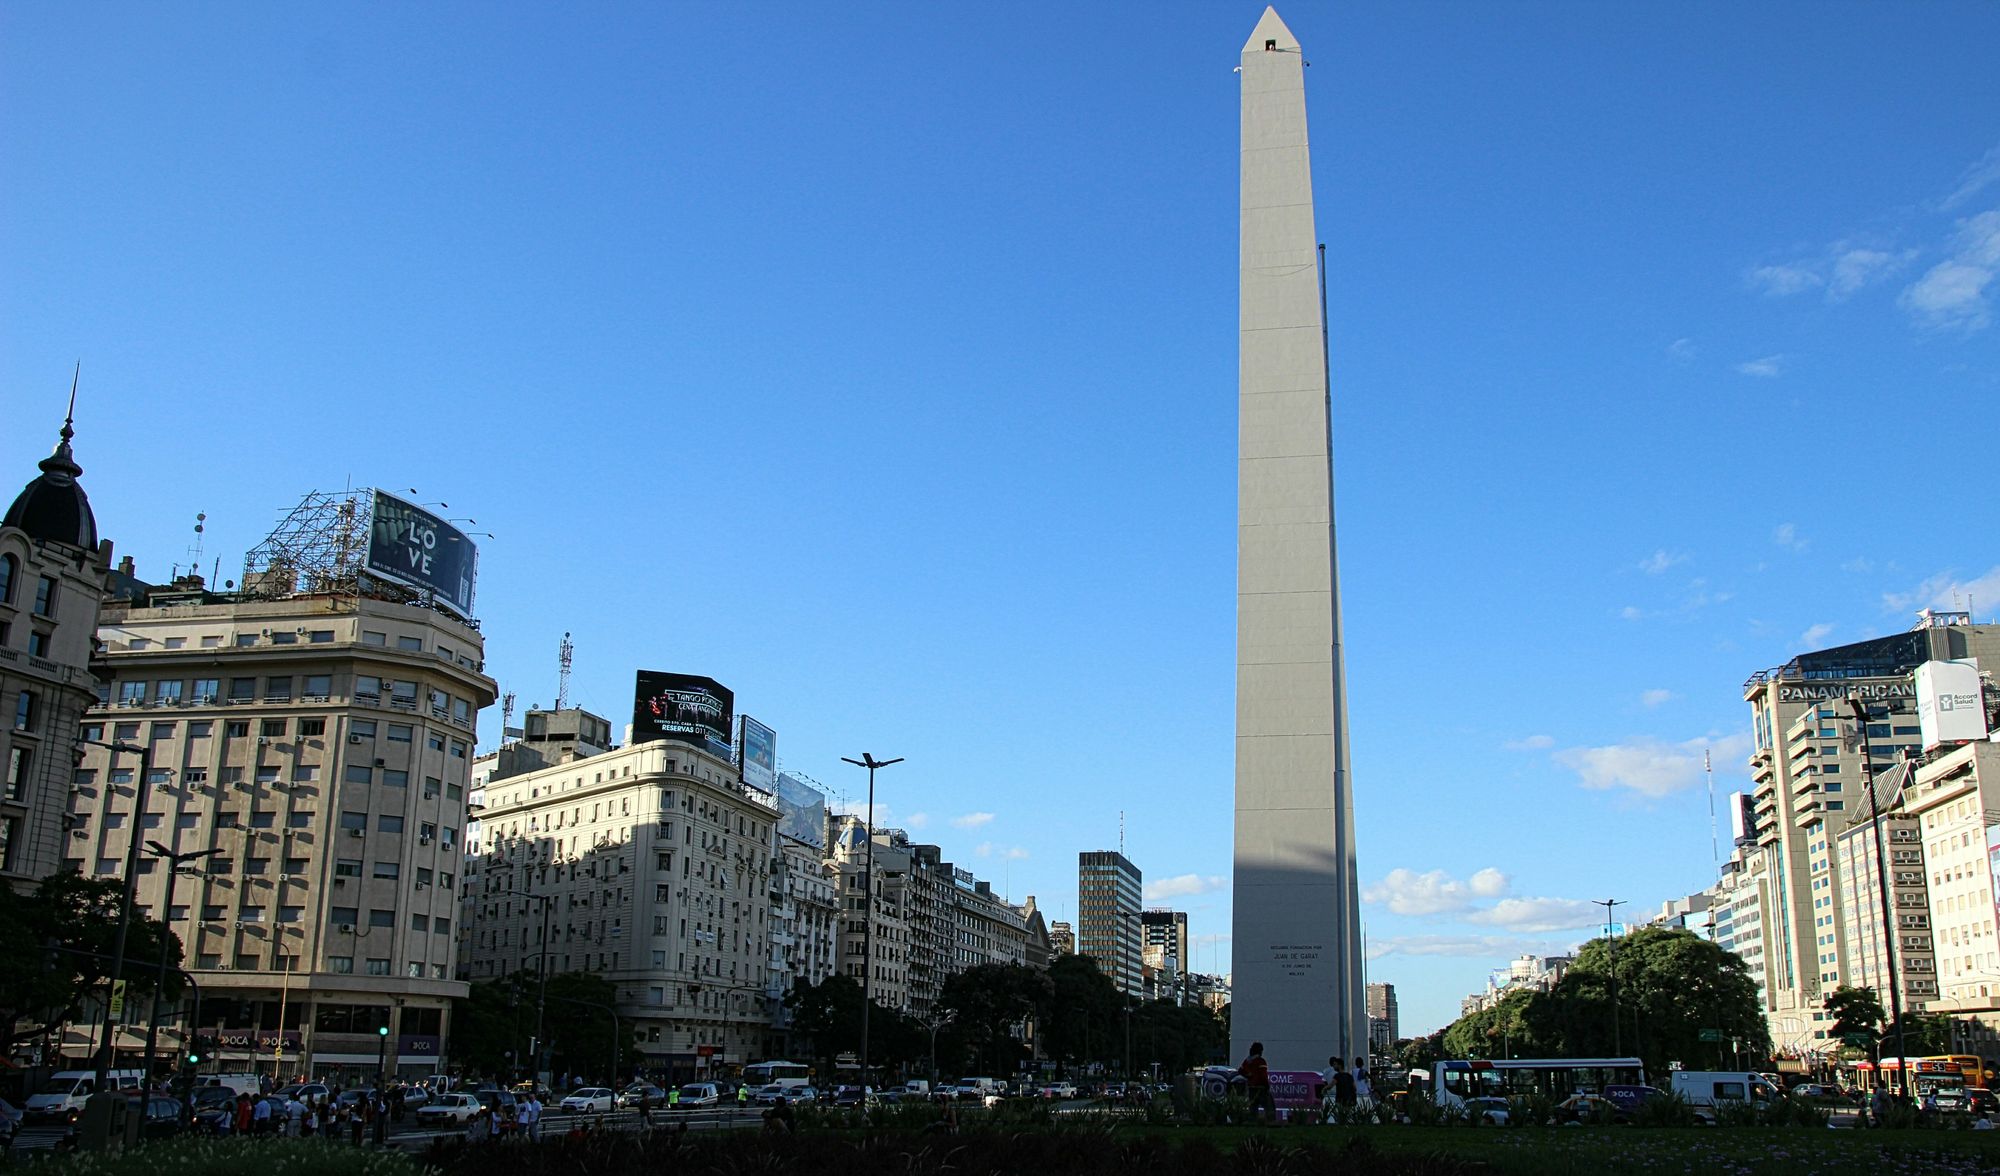 Impressions from Buenos Aires